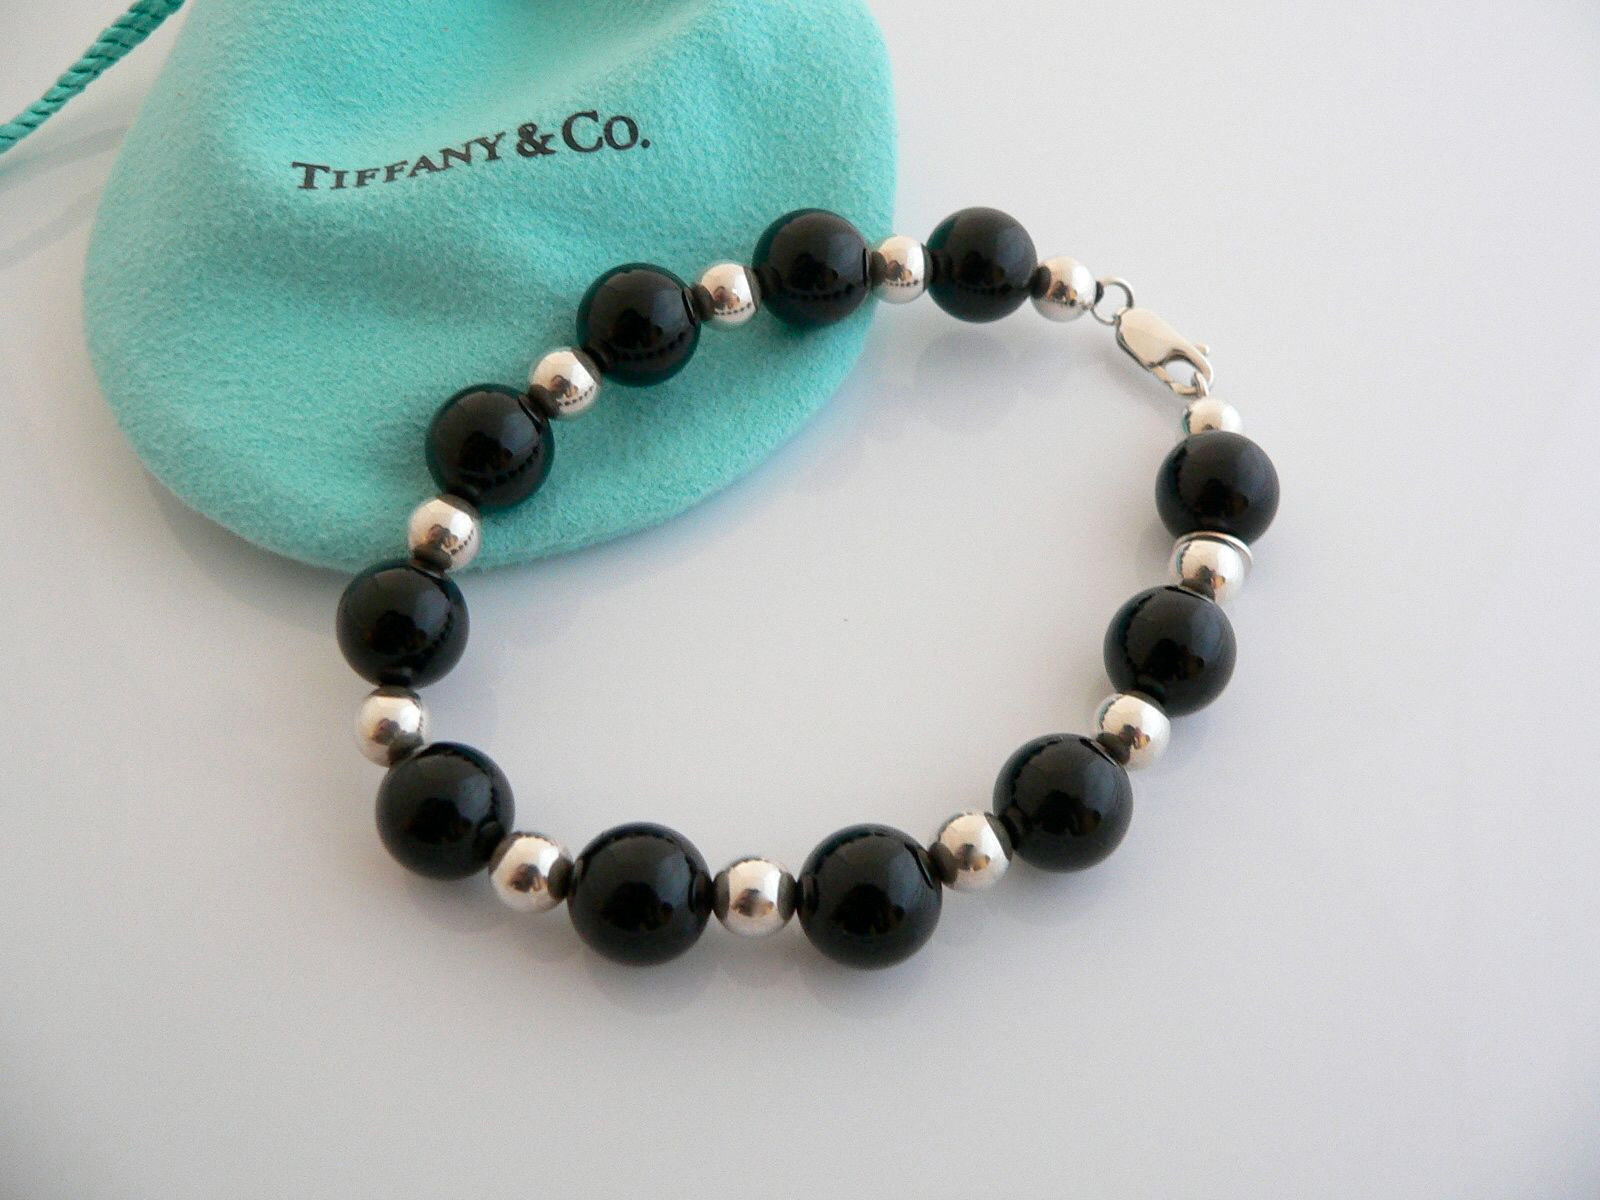 Pin by Chuleekorn R. on Aor | Tiffany and co jewelry, Tiffany and co  bracelet, Tiffany bead bracelet